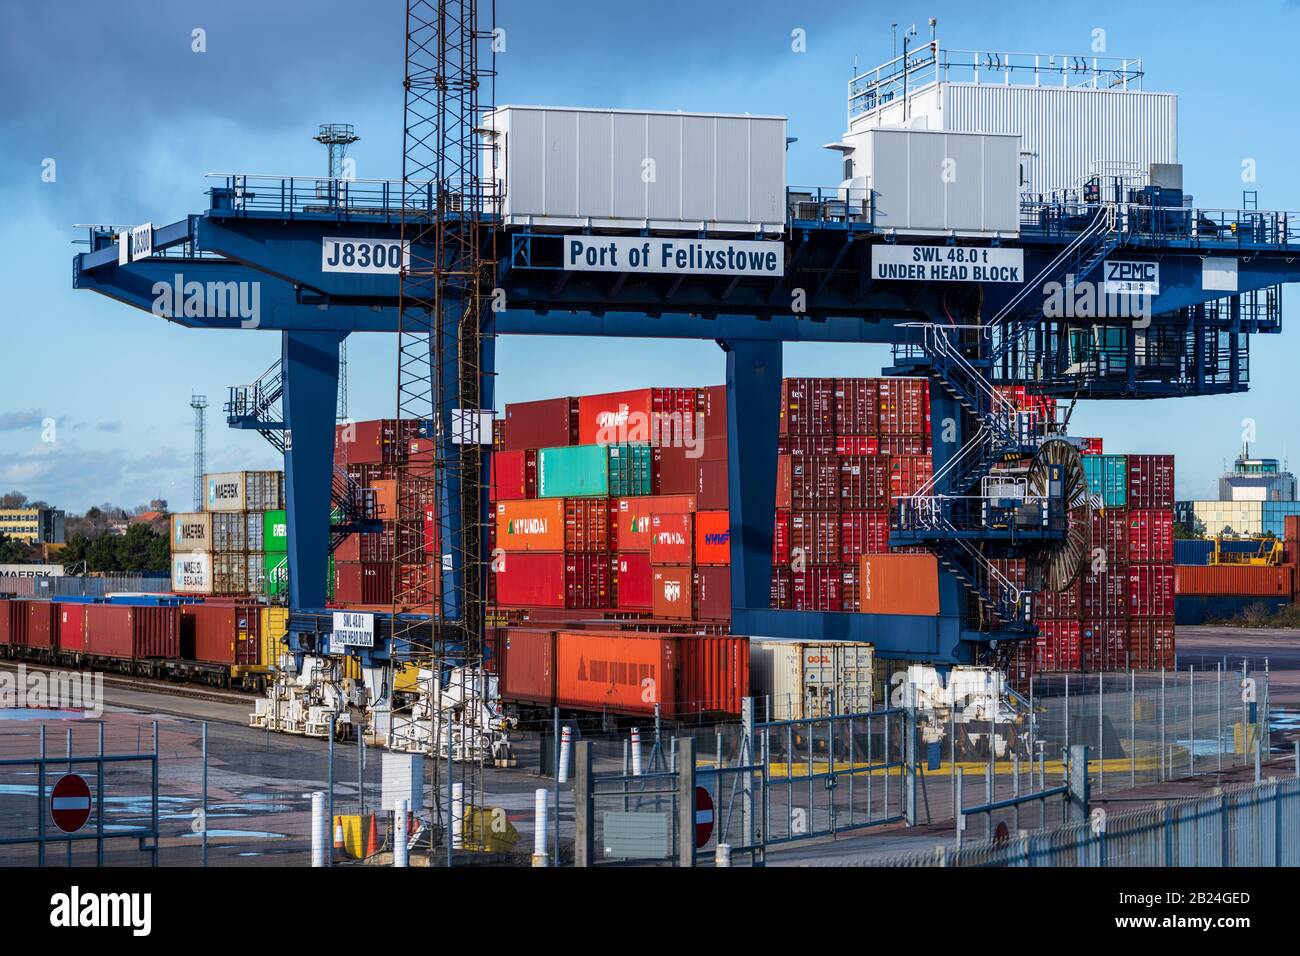 Railway Container Shipping UK. Intermodal containers being loaded onto freight trains for onward transportation from Felixstowe Container Port. Stock Photo